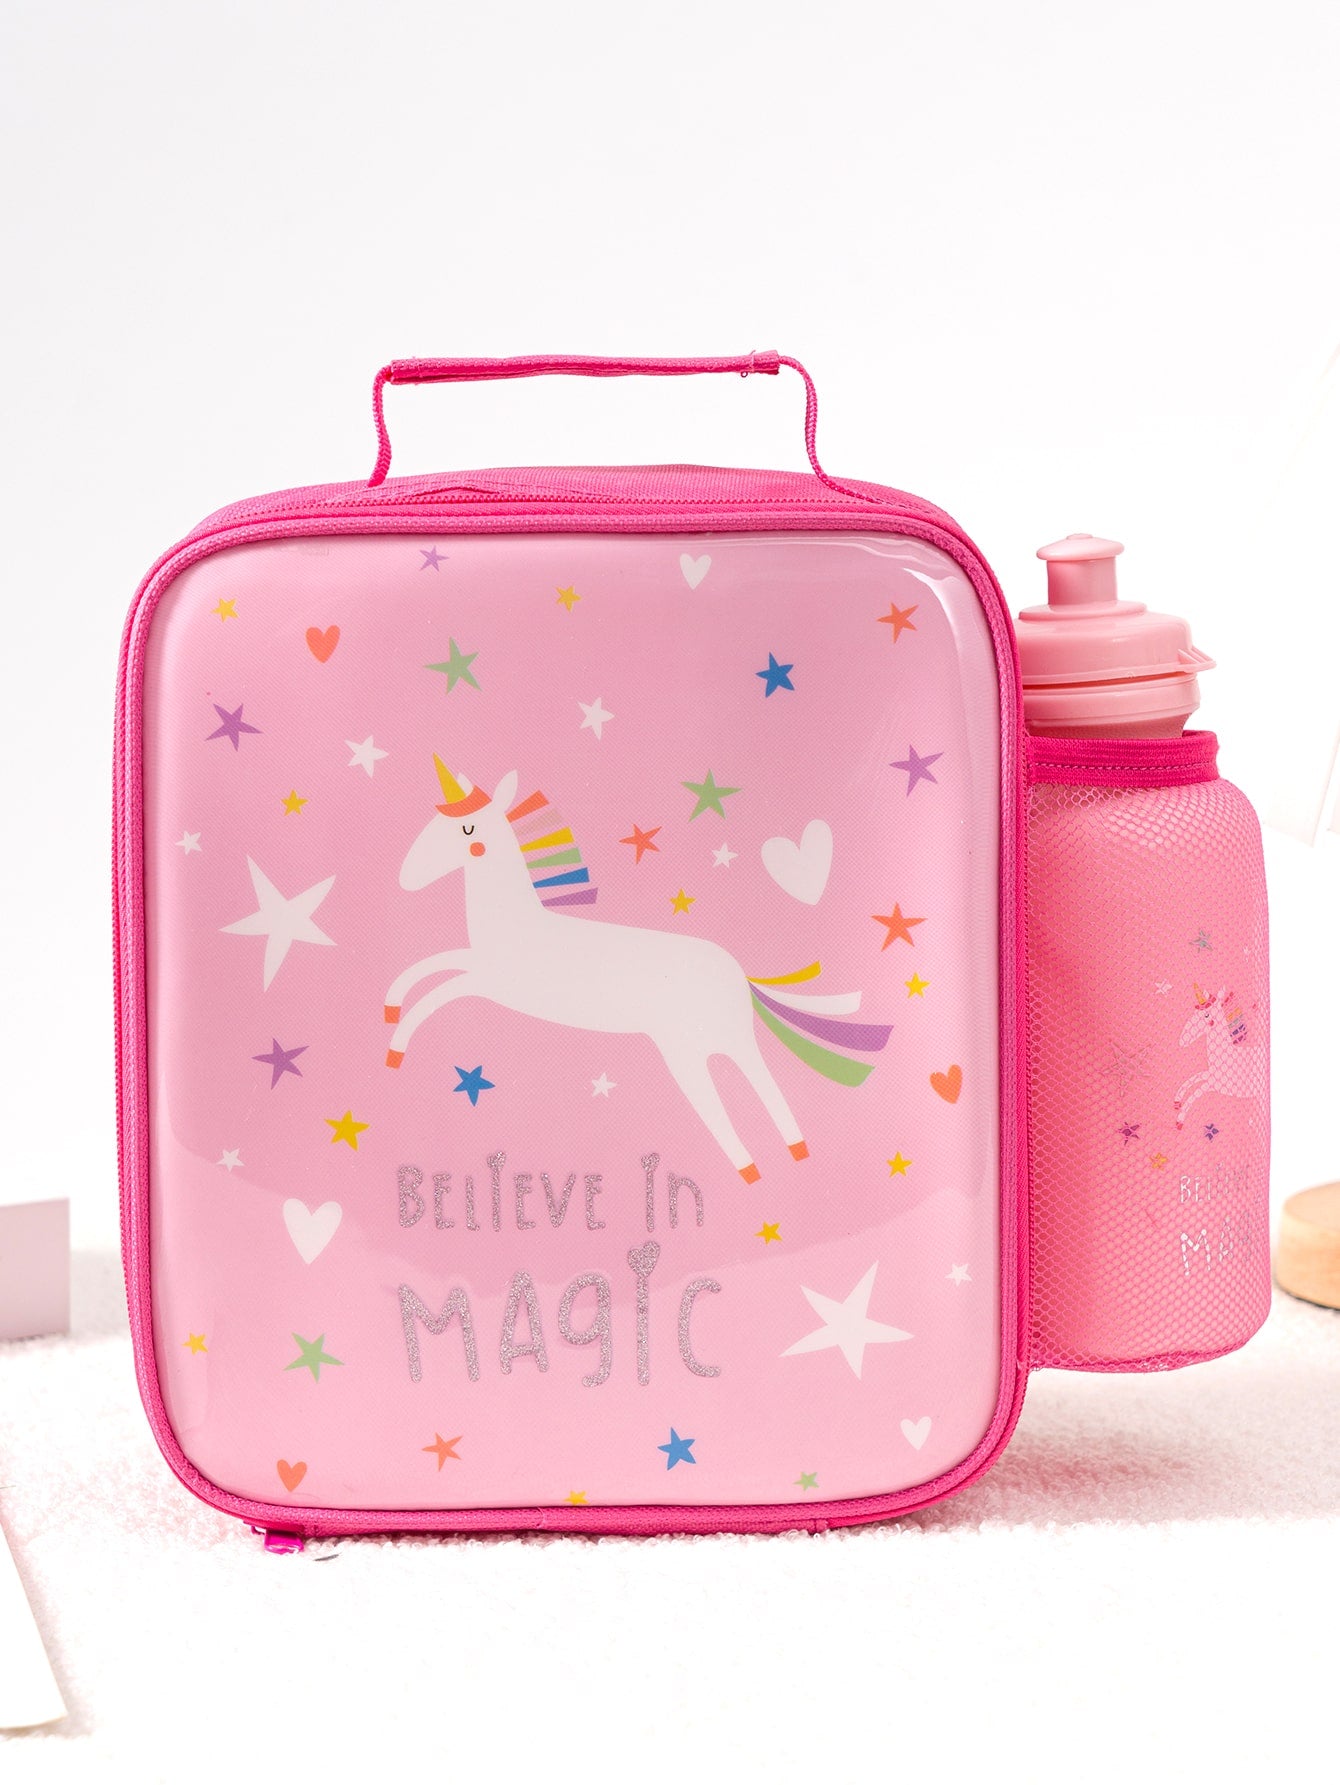 Unicorn Star Pattern Insulated Lunch Bag Cartoon Cute Lunch Box Storage Bag For Students